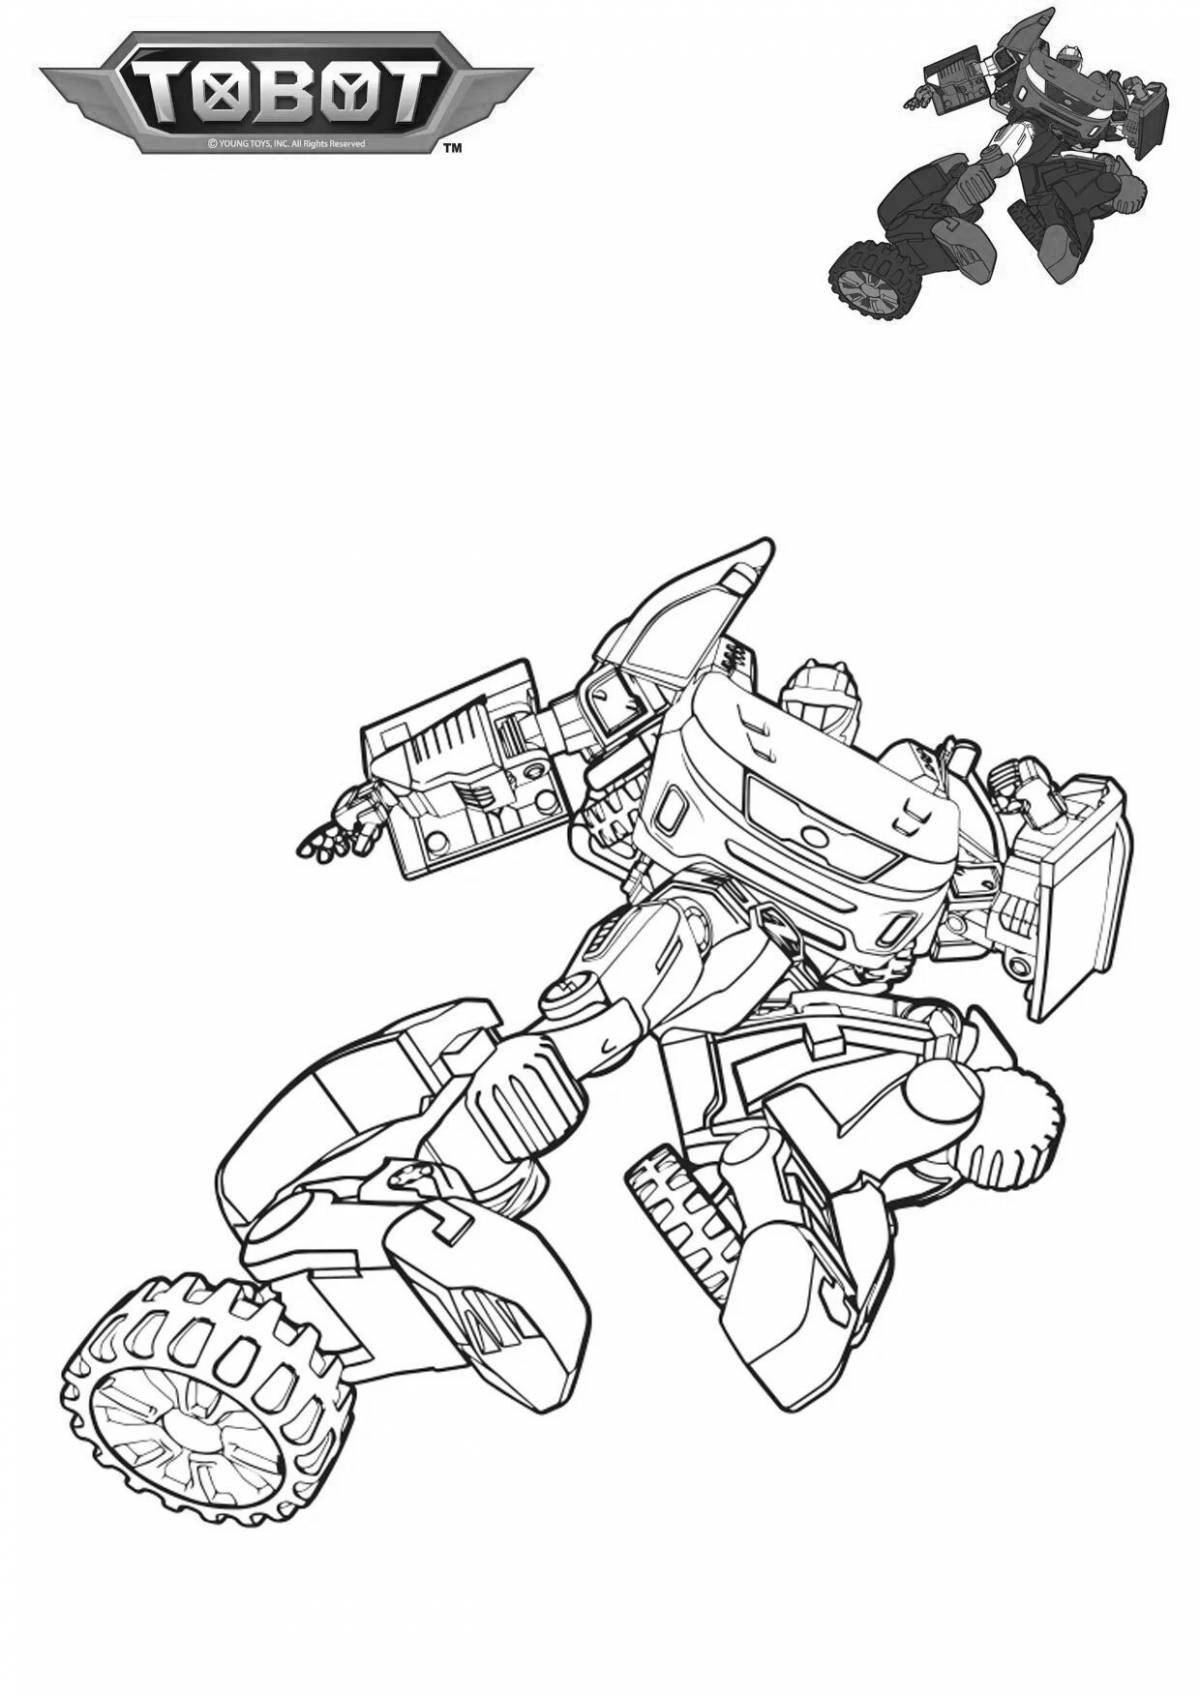 Cute tobot coloring page